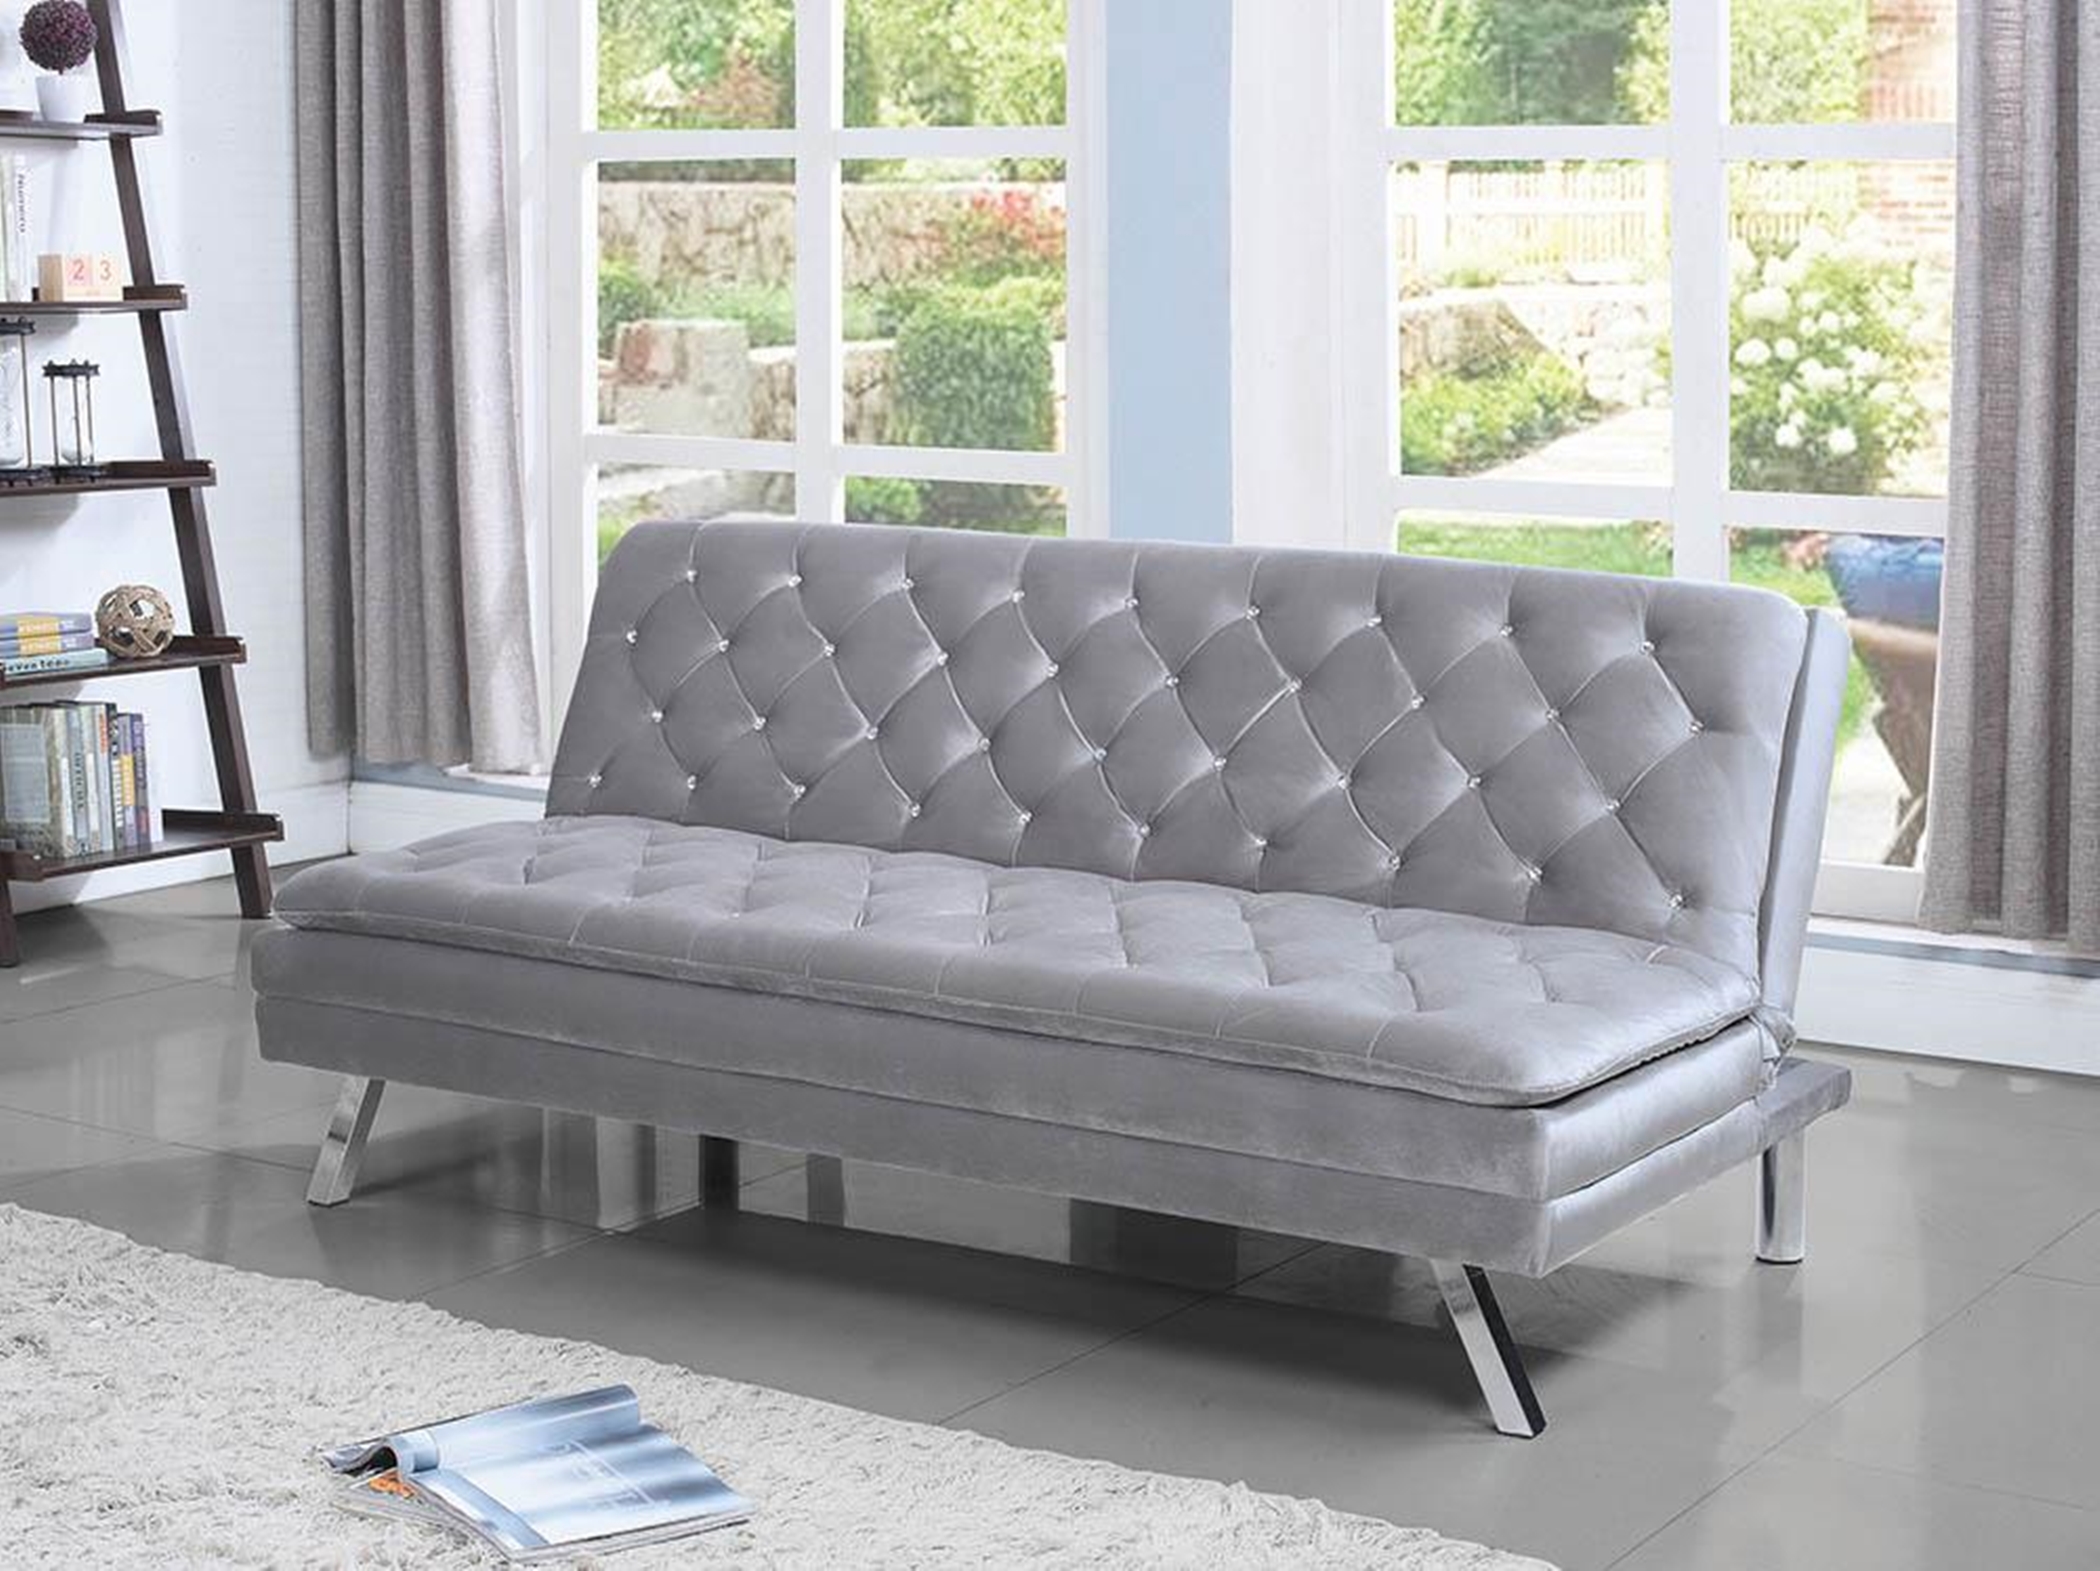 Glamorous Silver and Chrome Sofa Bed